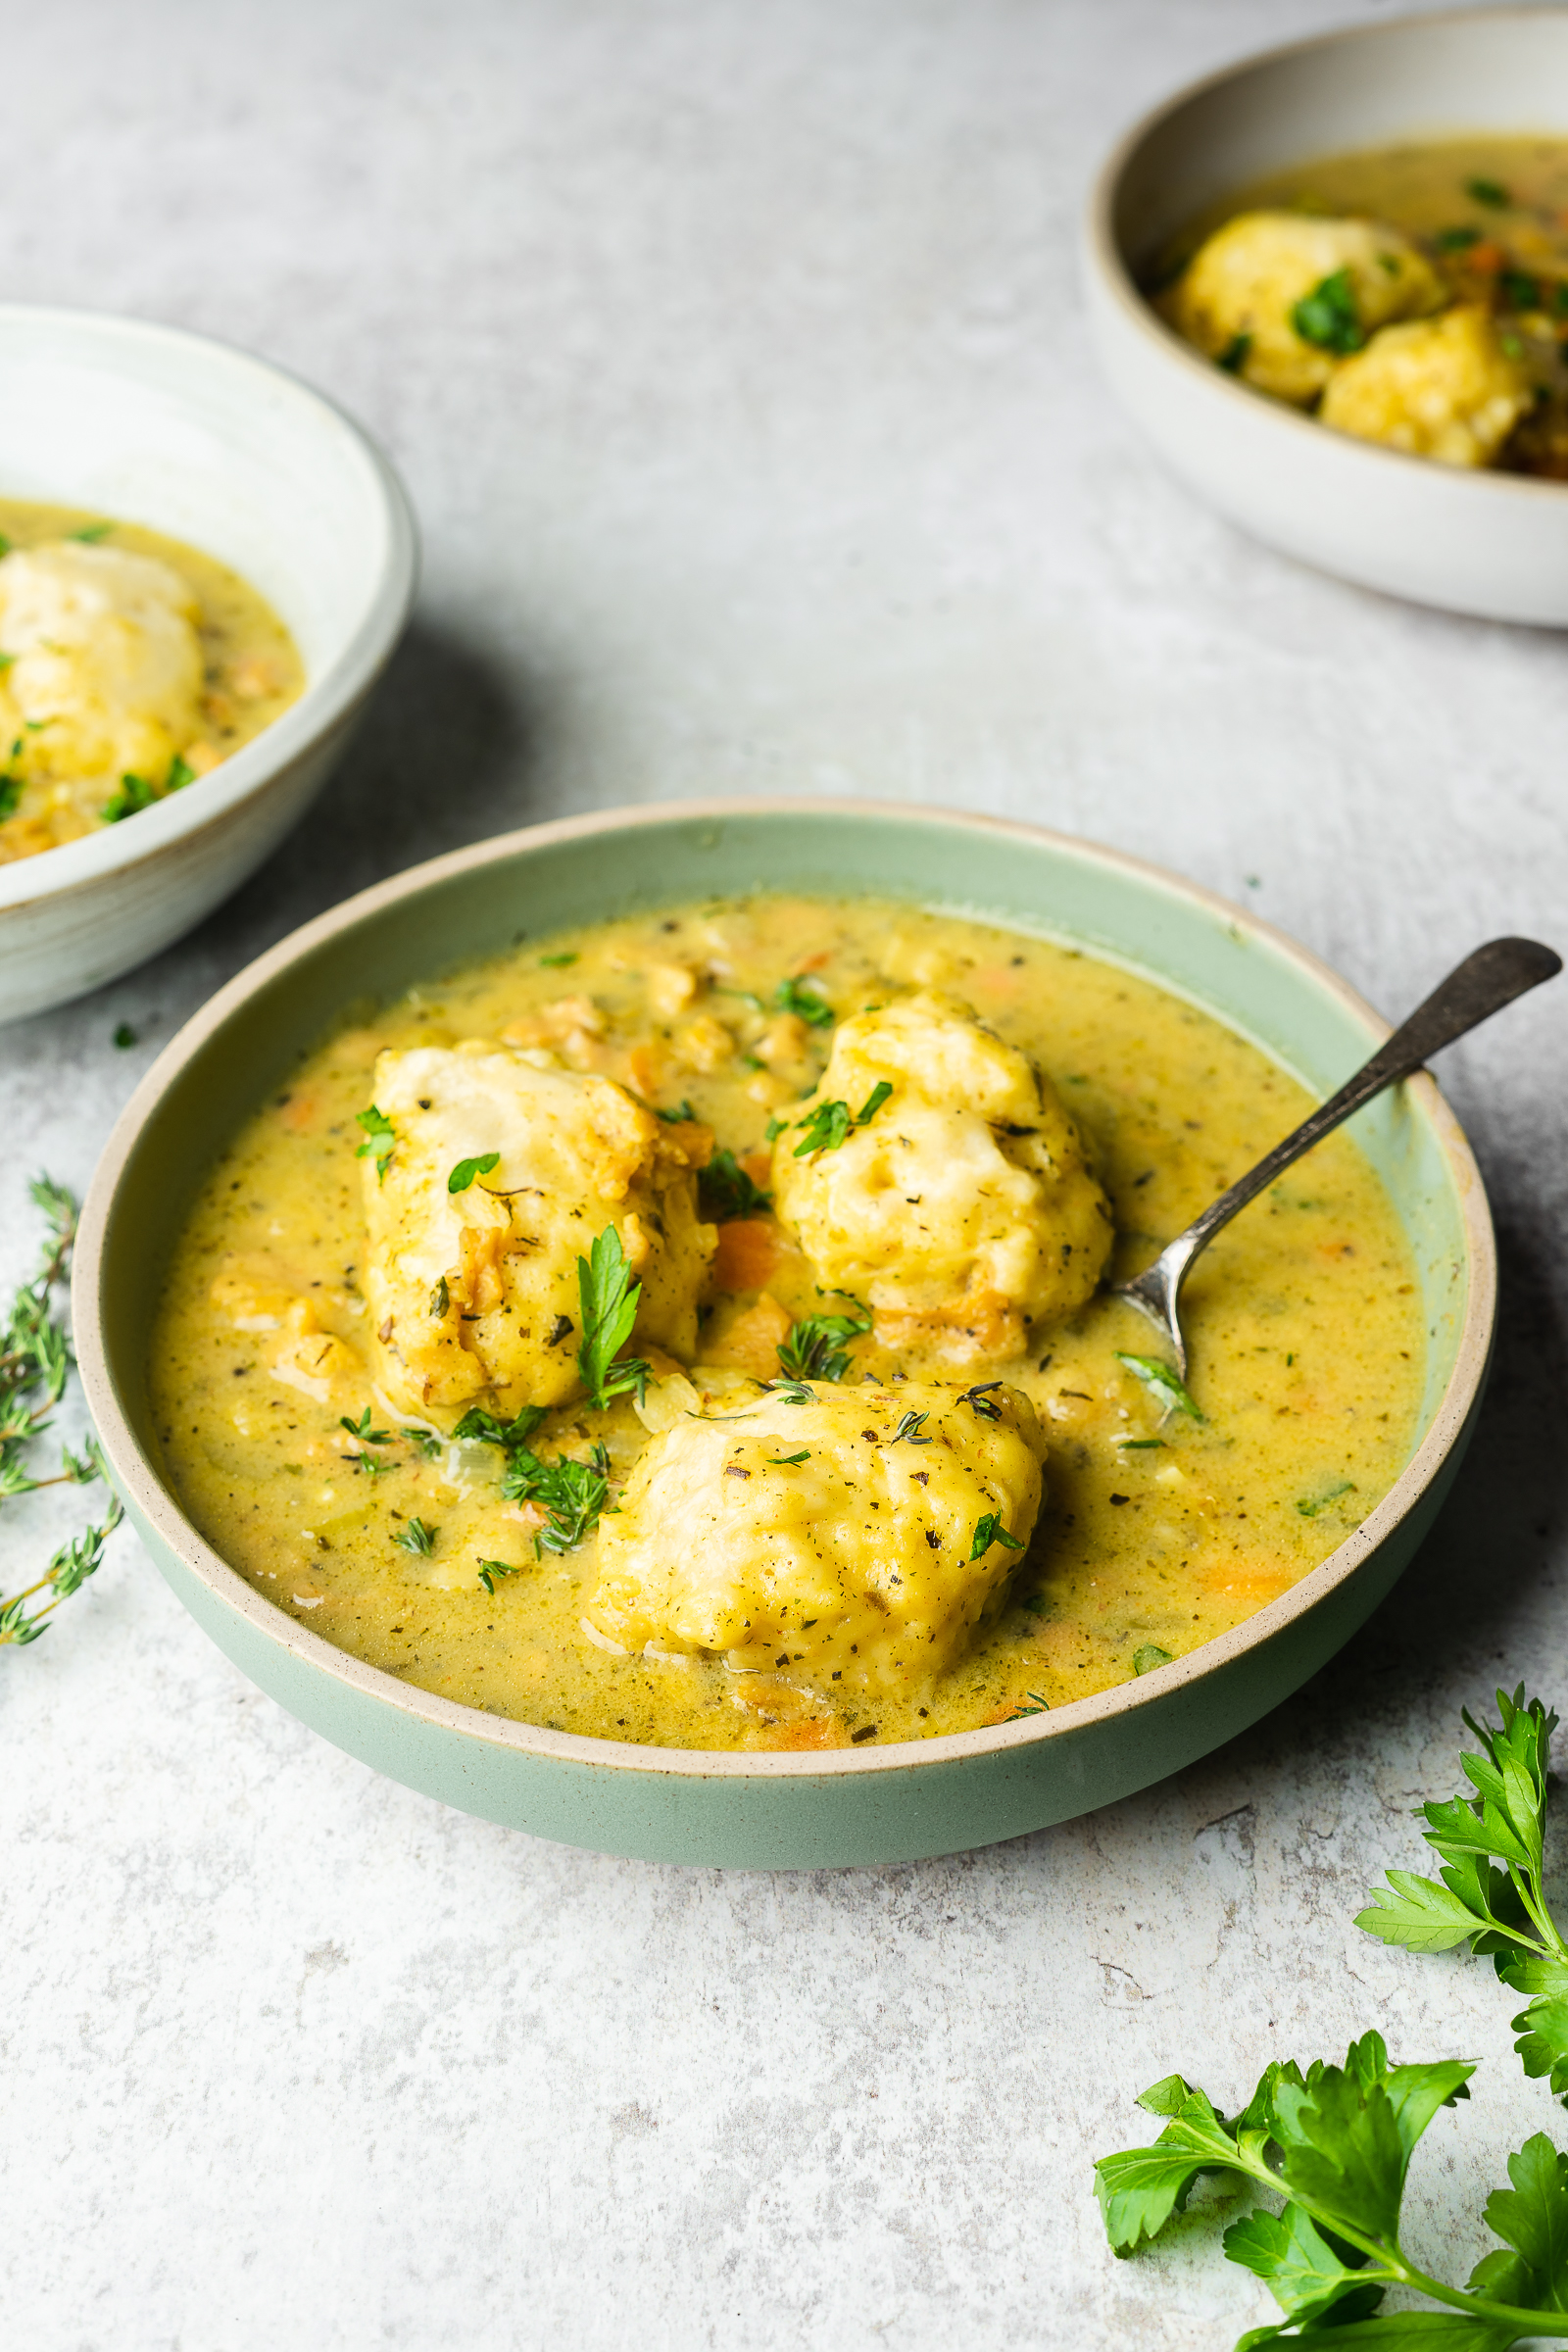 Chicken and dumplings in a green shallow serving bowl.